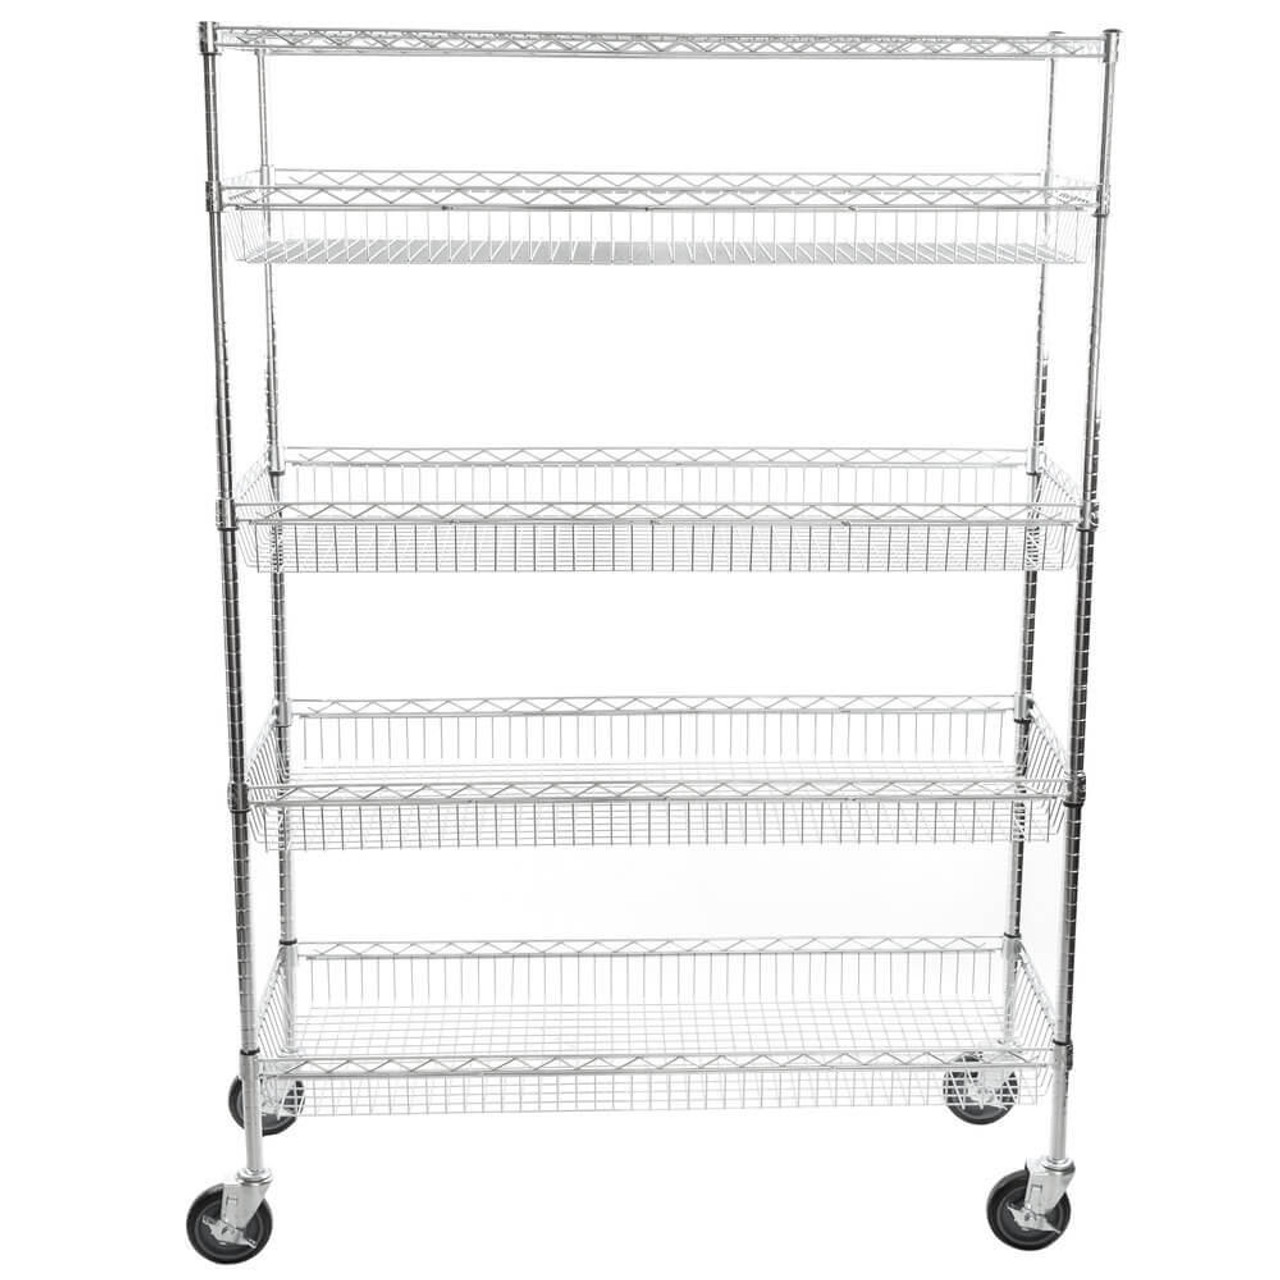 Chicken Pieces CP NSF Chrome 4 Basket and 1 Shelf Kit - 18" x 48" x 70" | Versatile and Durable Storage Solution 